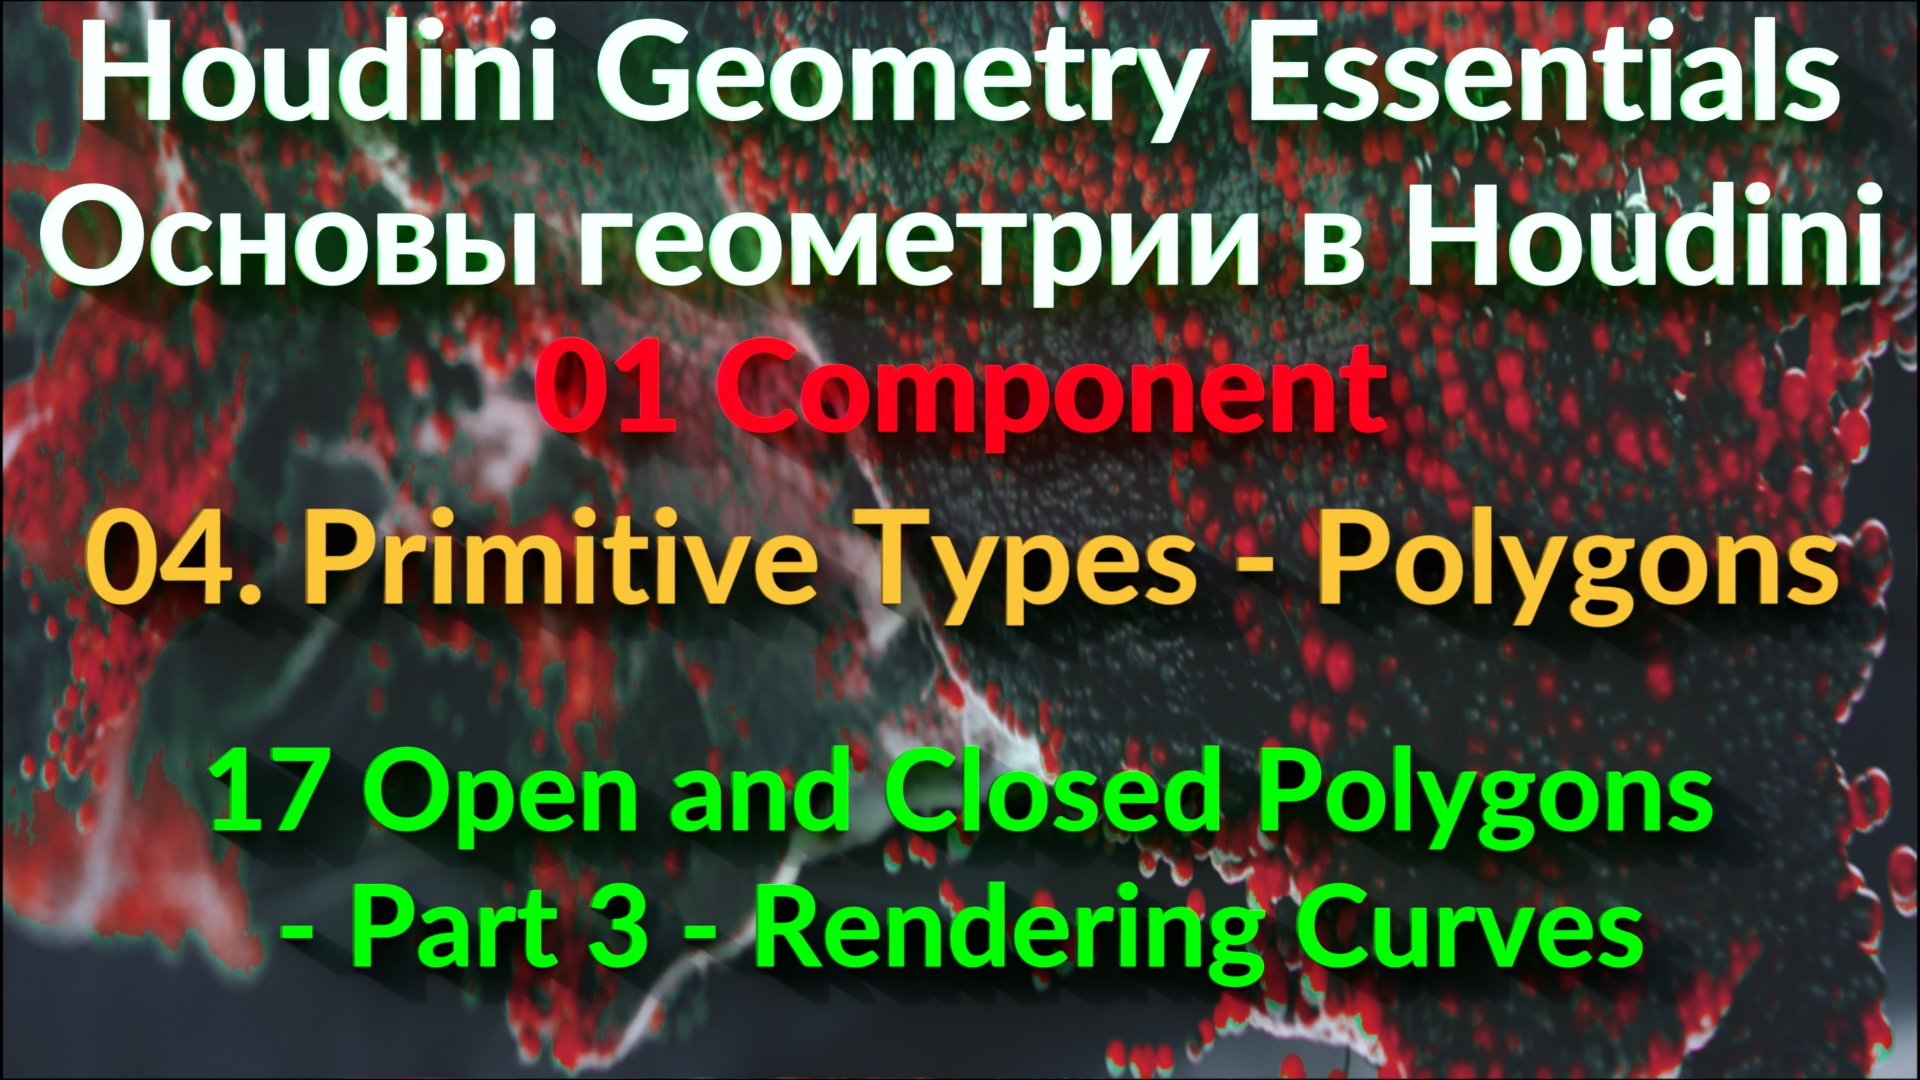 01_04_17. Open and Closed Polygons - Part 3 - Rendering Curves